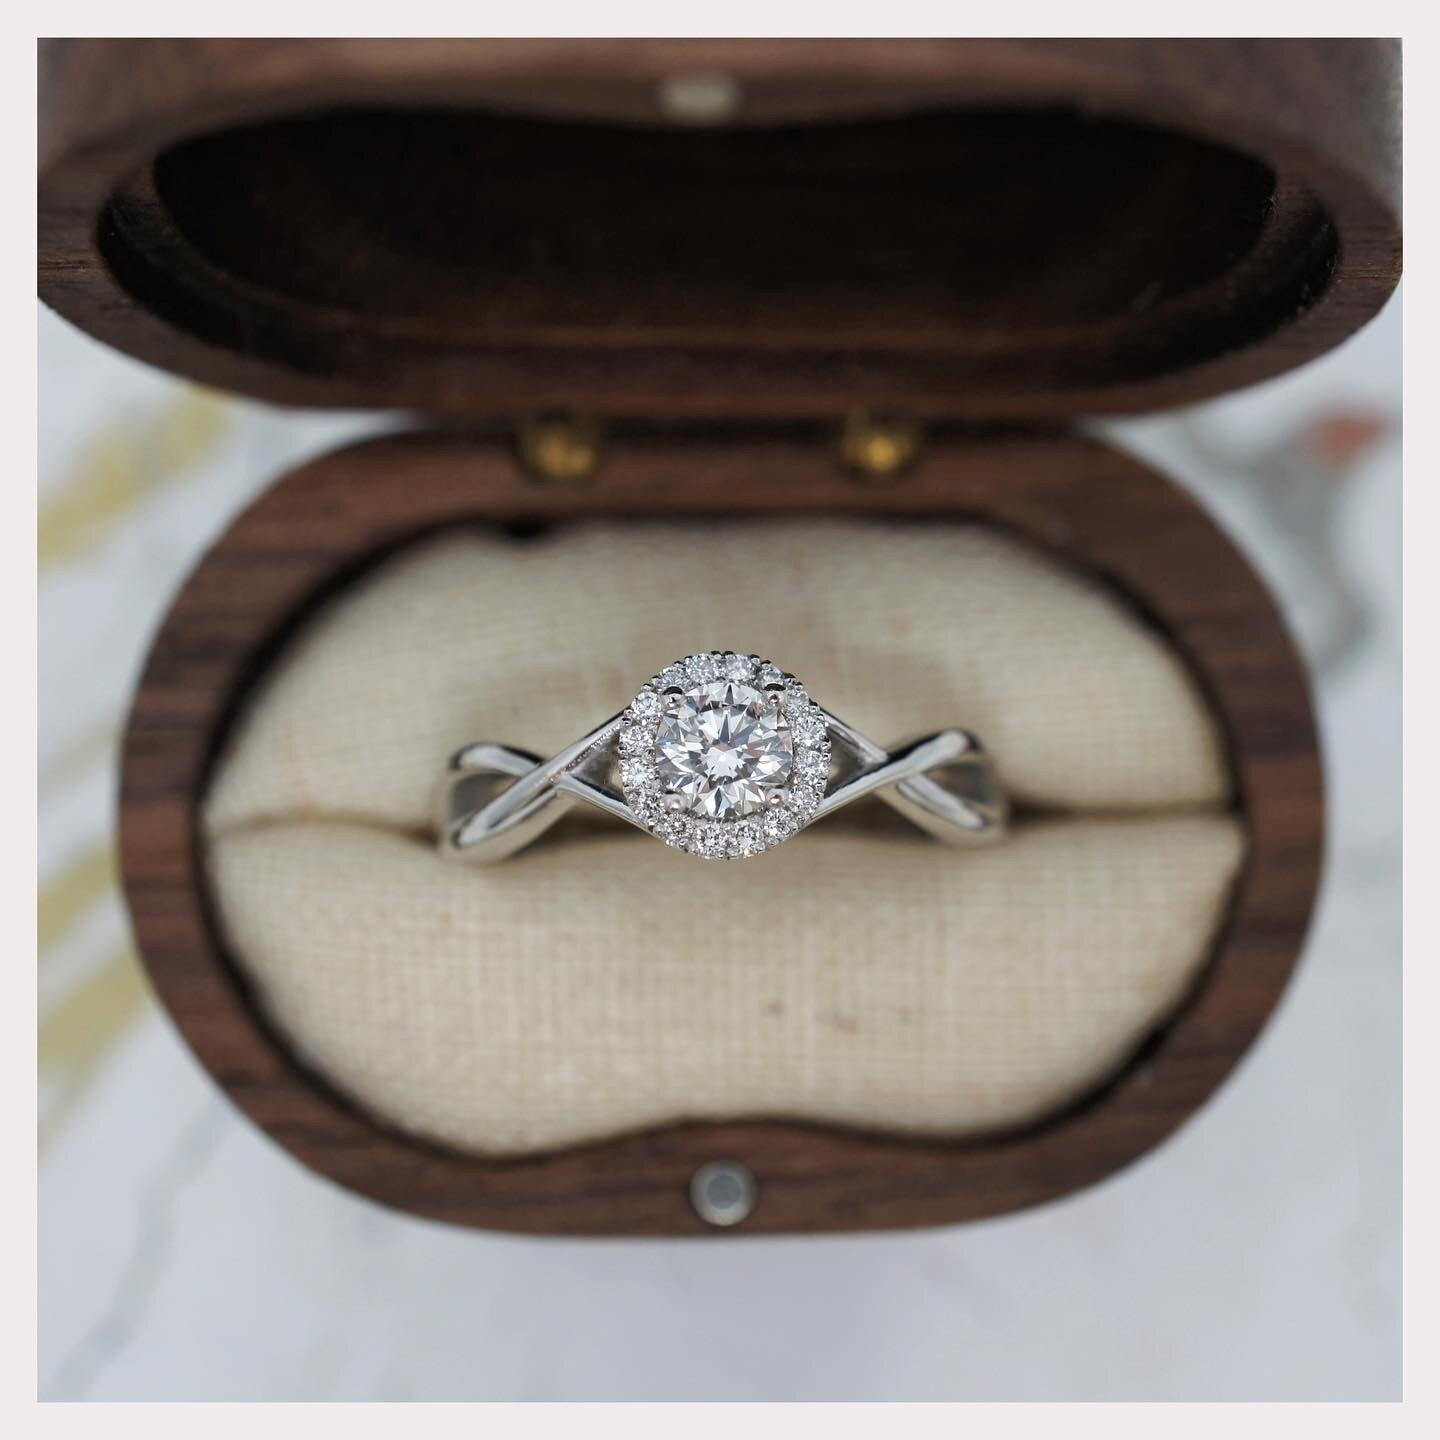 Huge congratulations to Luke and Zoe who got engaged over Christmas! 

We worked closely with Luke to design this dainty and super sparkly diamond halo ring as a surprise for Zoe.

Set with Canadian diamonds and made from recycled platinum. 

🤍

#et